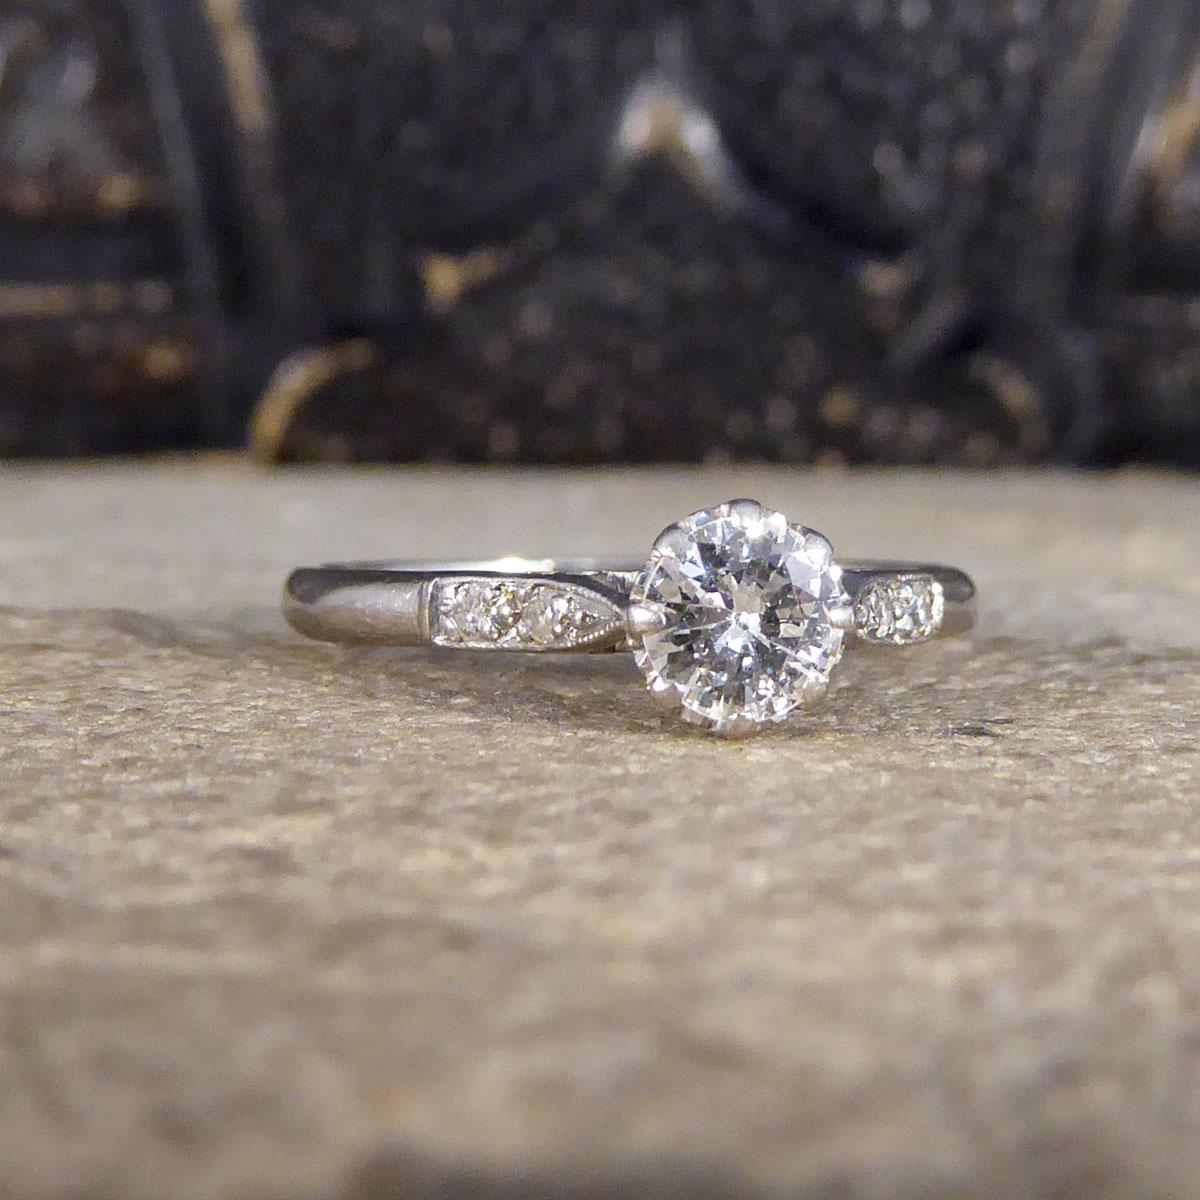 This gorgeous Diamond ring that was made in the 1930's. Such a good quality example of an Art Deco solitaire ring that has a 0.30ct Diamond in the centre with two further Diamonds set in to each of the tapered shoulders. It would make a lovely Art